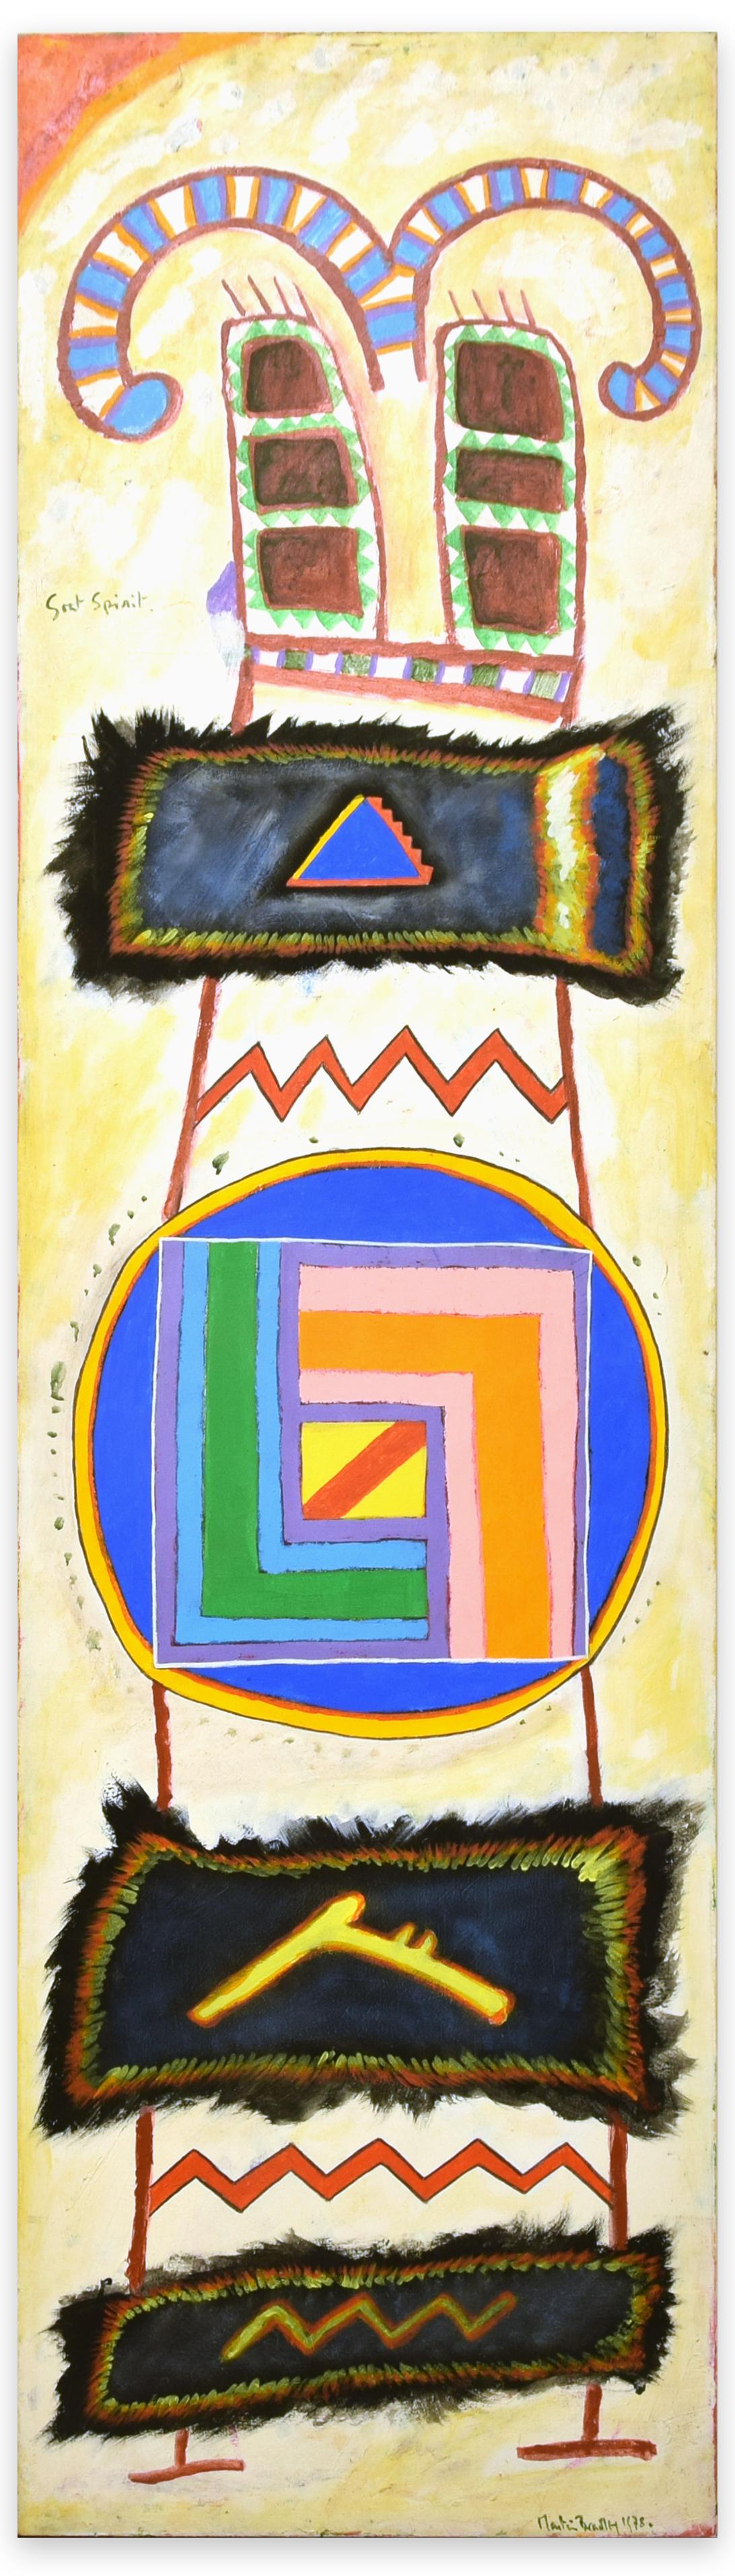 Goat Spirit is a colorful original painting realized in 1978 by the English artist Martin Bradley (born 1931).

A surprising oil painting (oil, ink, acrylic, stretched with the spatula), signed and dated on lower right margin. 

A beautiful totem